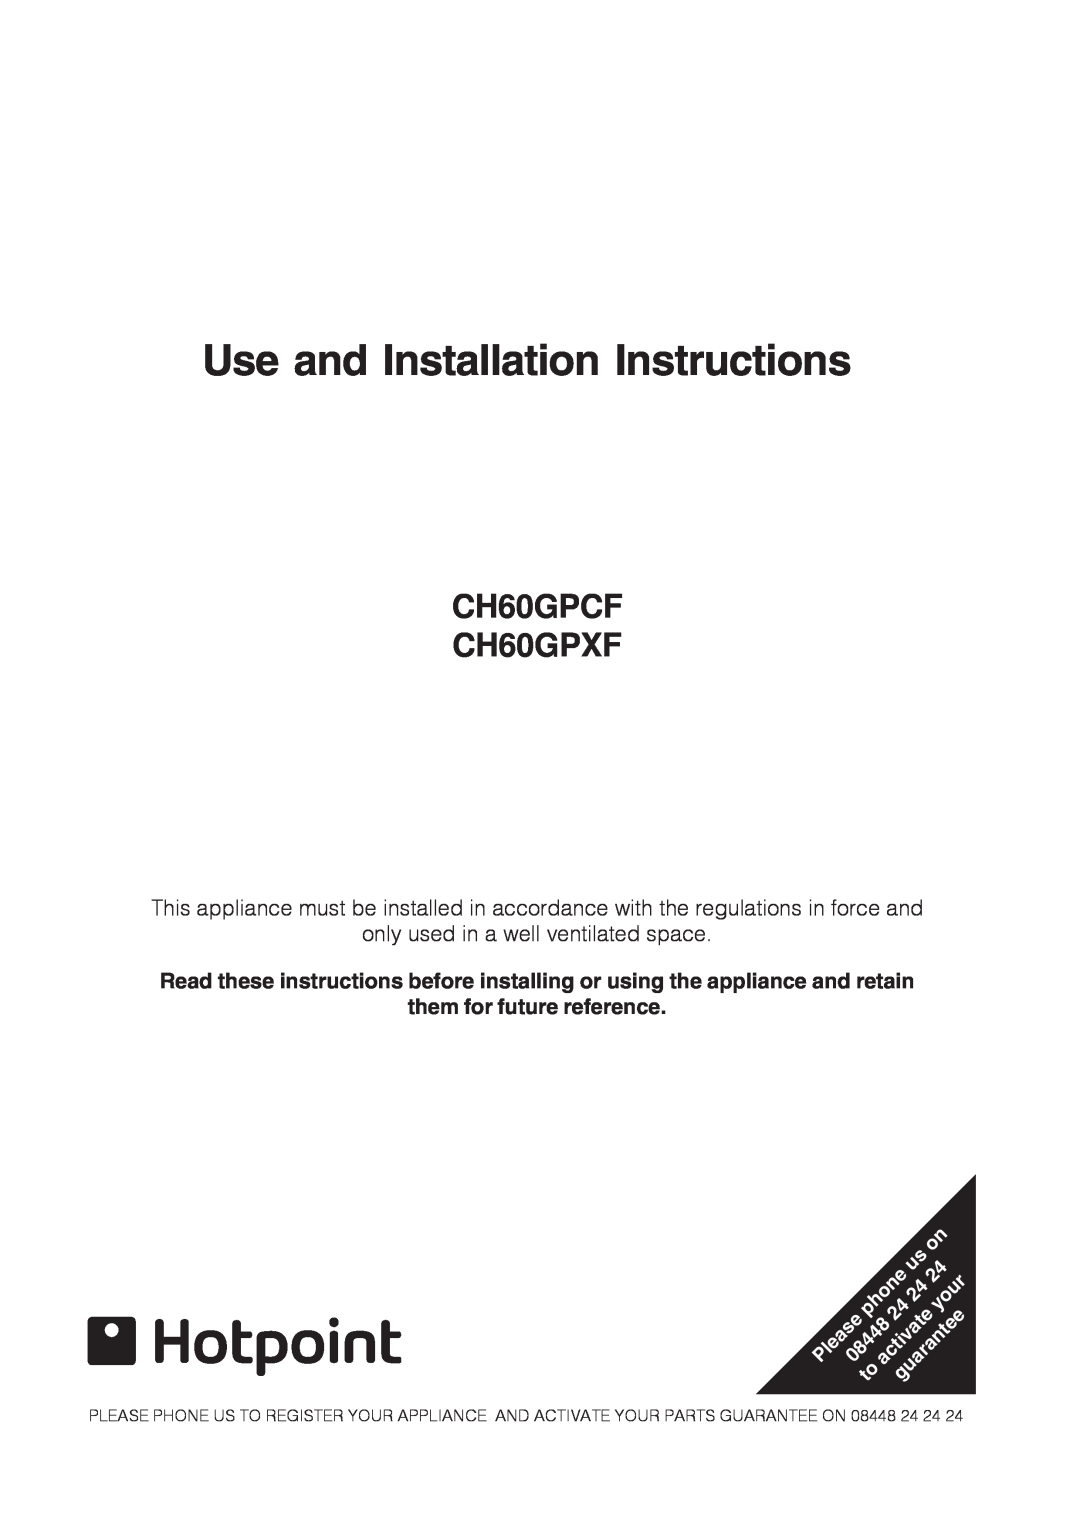 Hotpoint ch60gpxf installation instructions Use and Installation Instructions, them for future reference, phone, your 